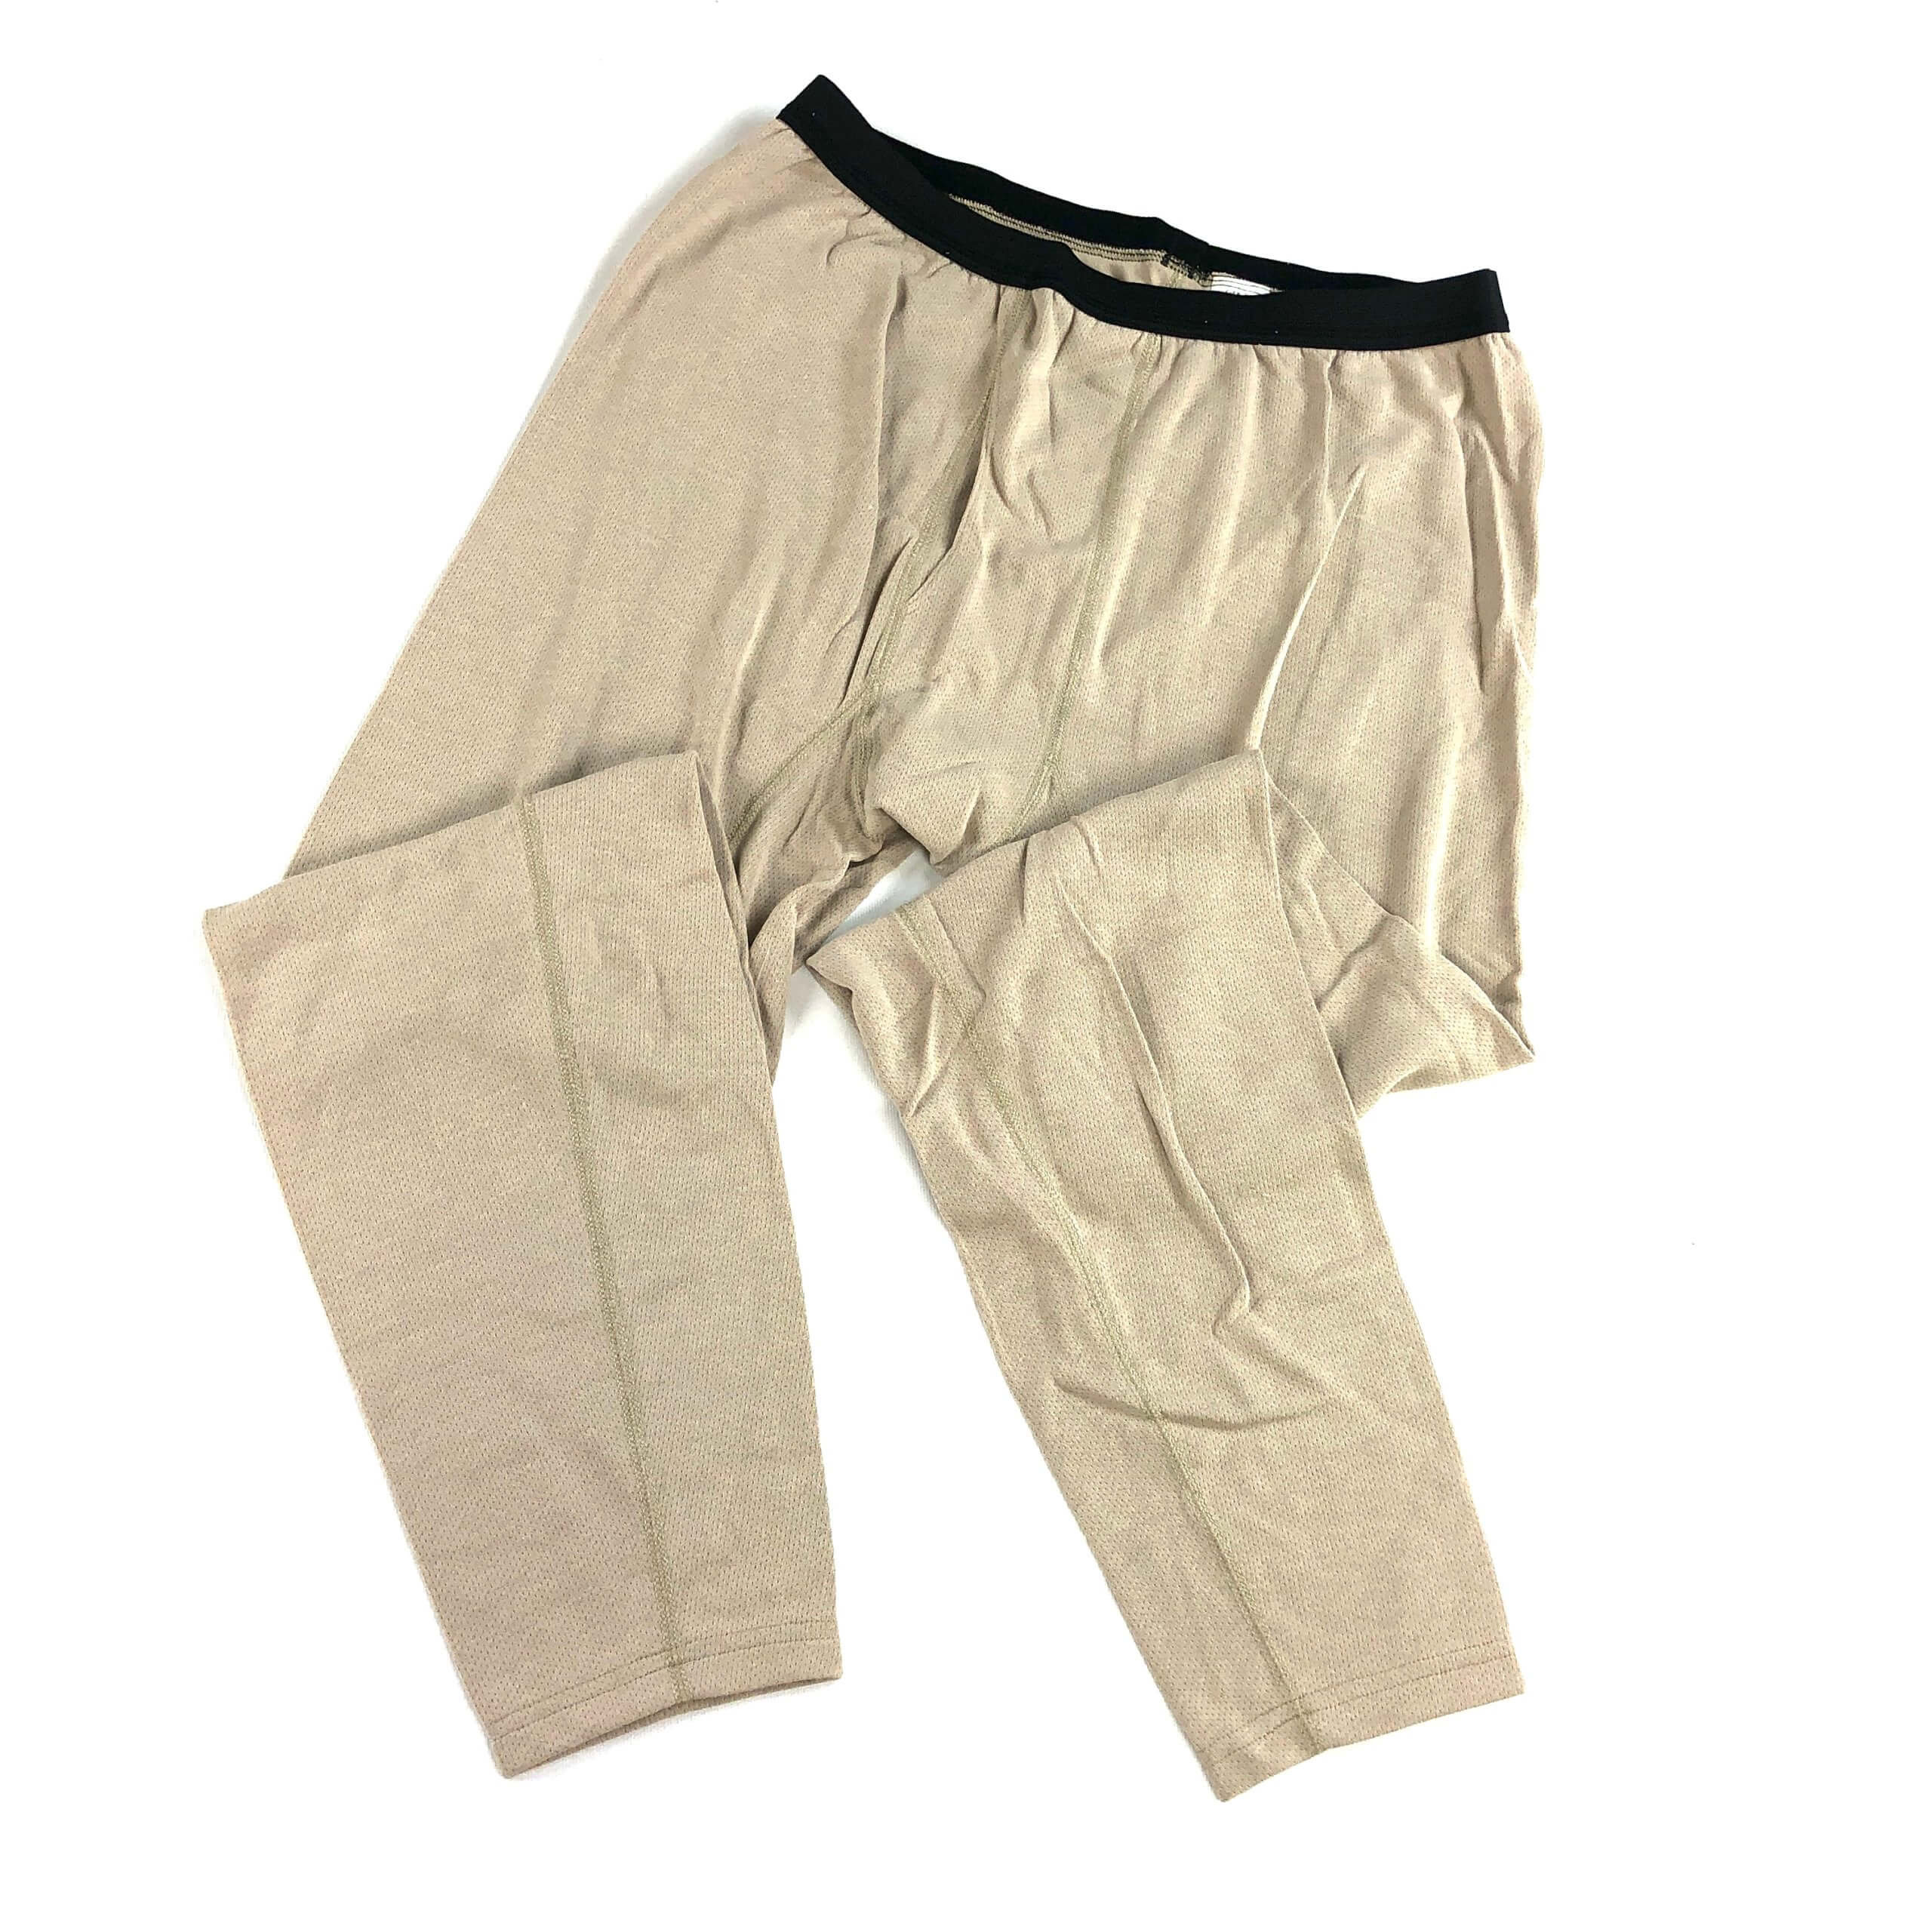 Drifire Medium Weight Thermal Bottoms, Fire Resistant [Genuine Issue]